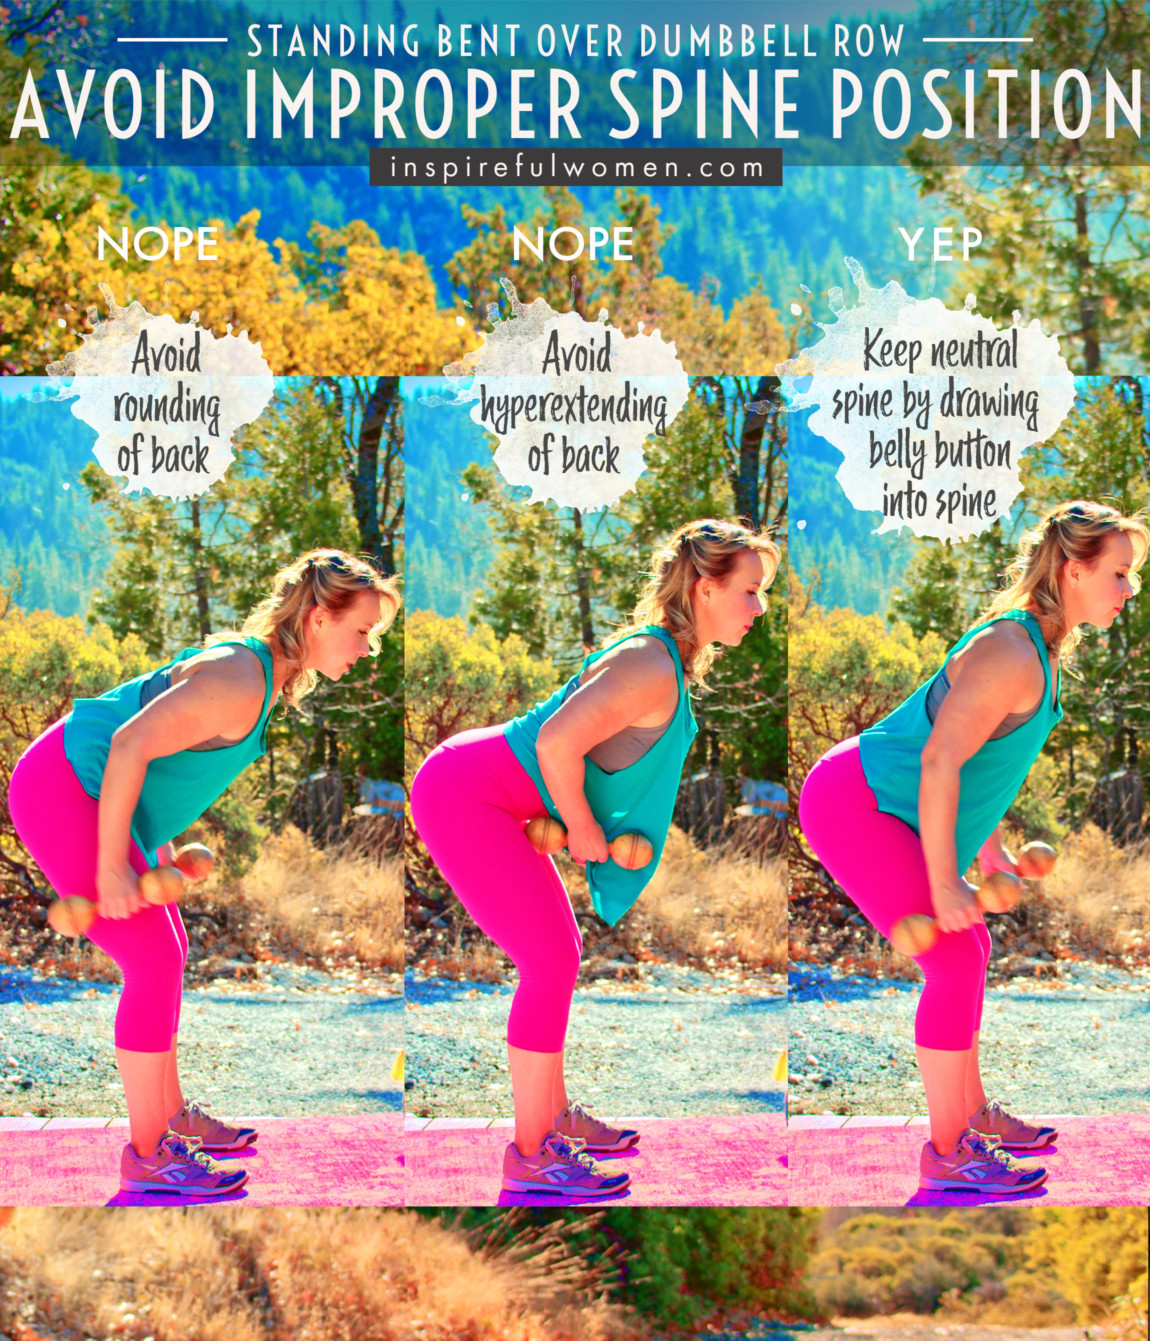 avoid-improper-spine-position-two-arm-dumbbell-row-standing-bent-over-common-mistakes